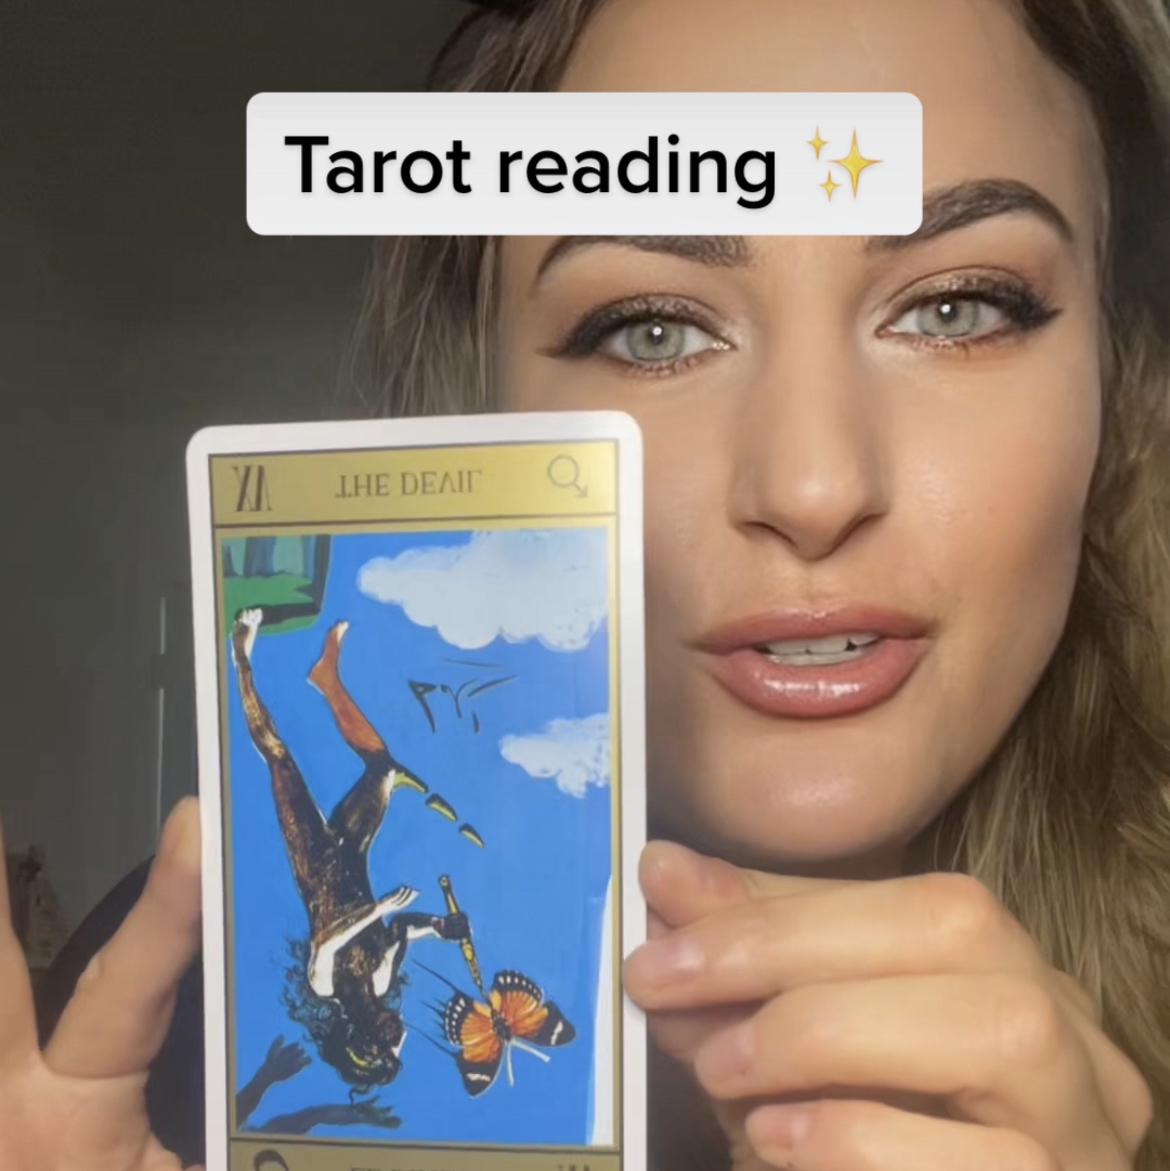 Tarot by Marine's images